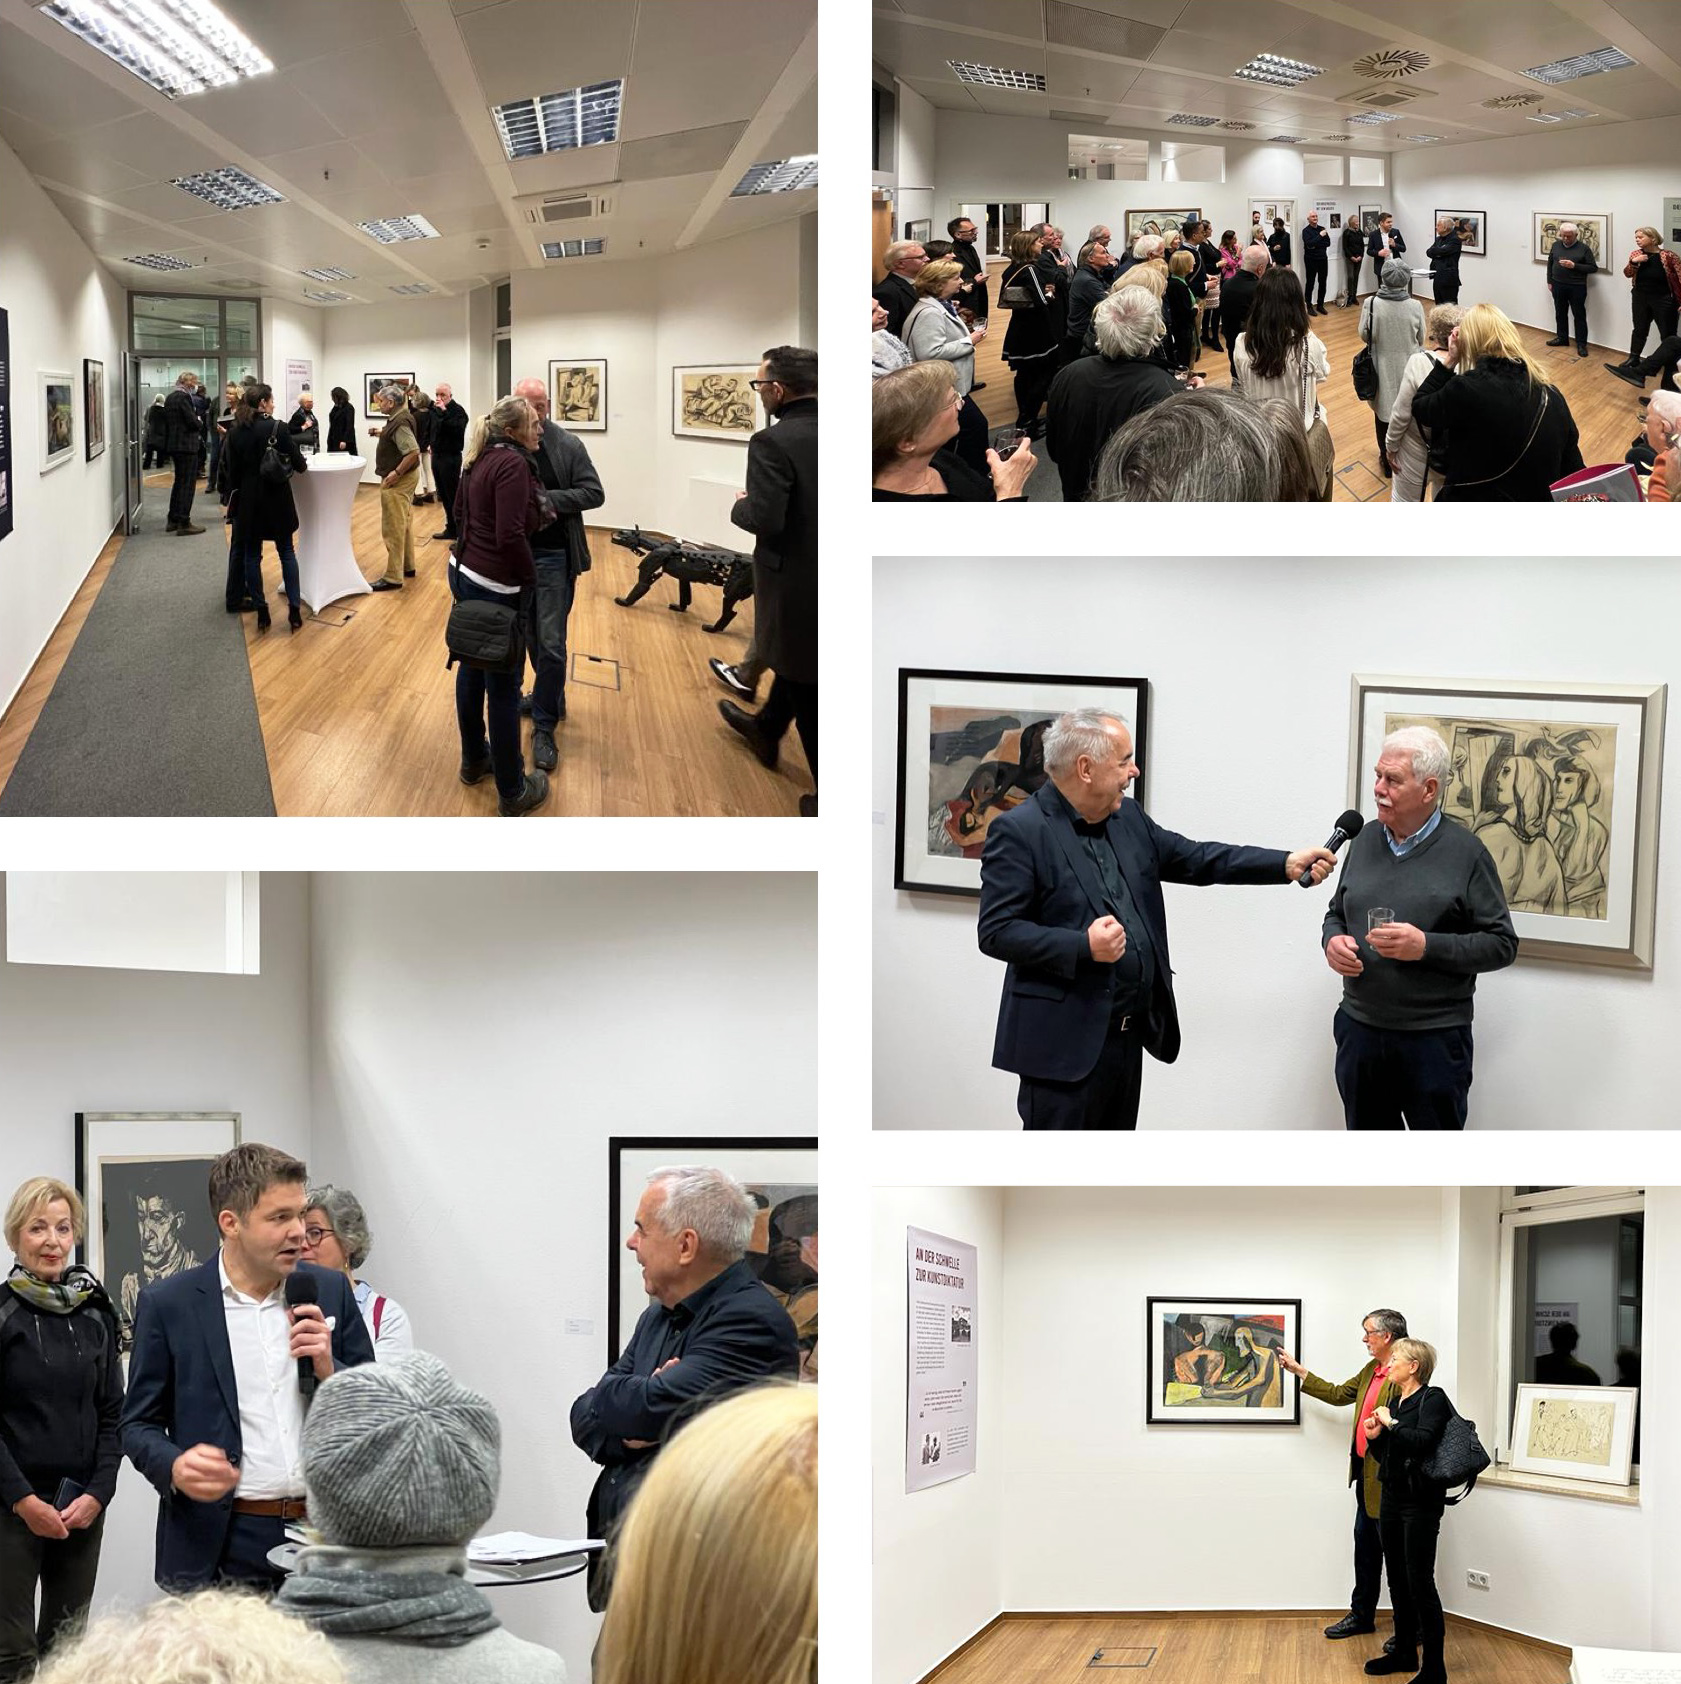 Impressions of the vernissage "Joseph Mader. An artist is rediscovered"